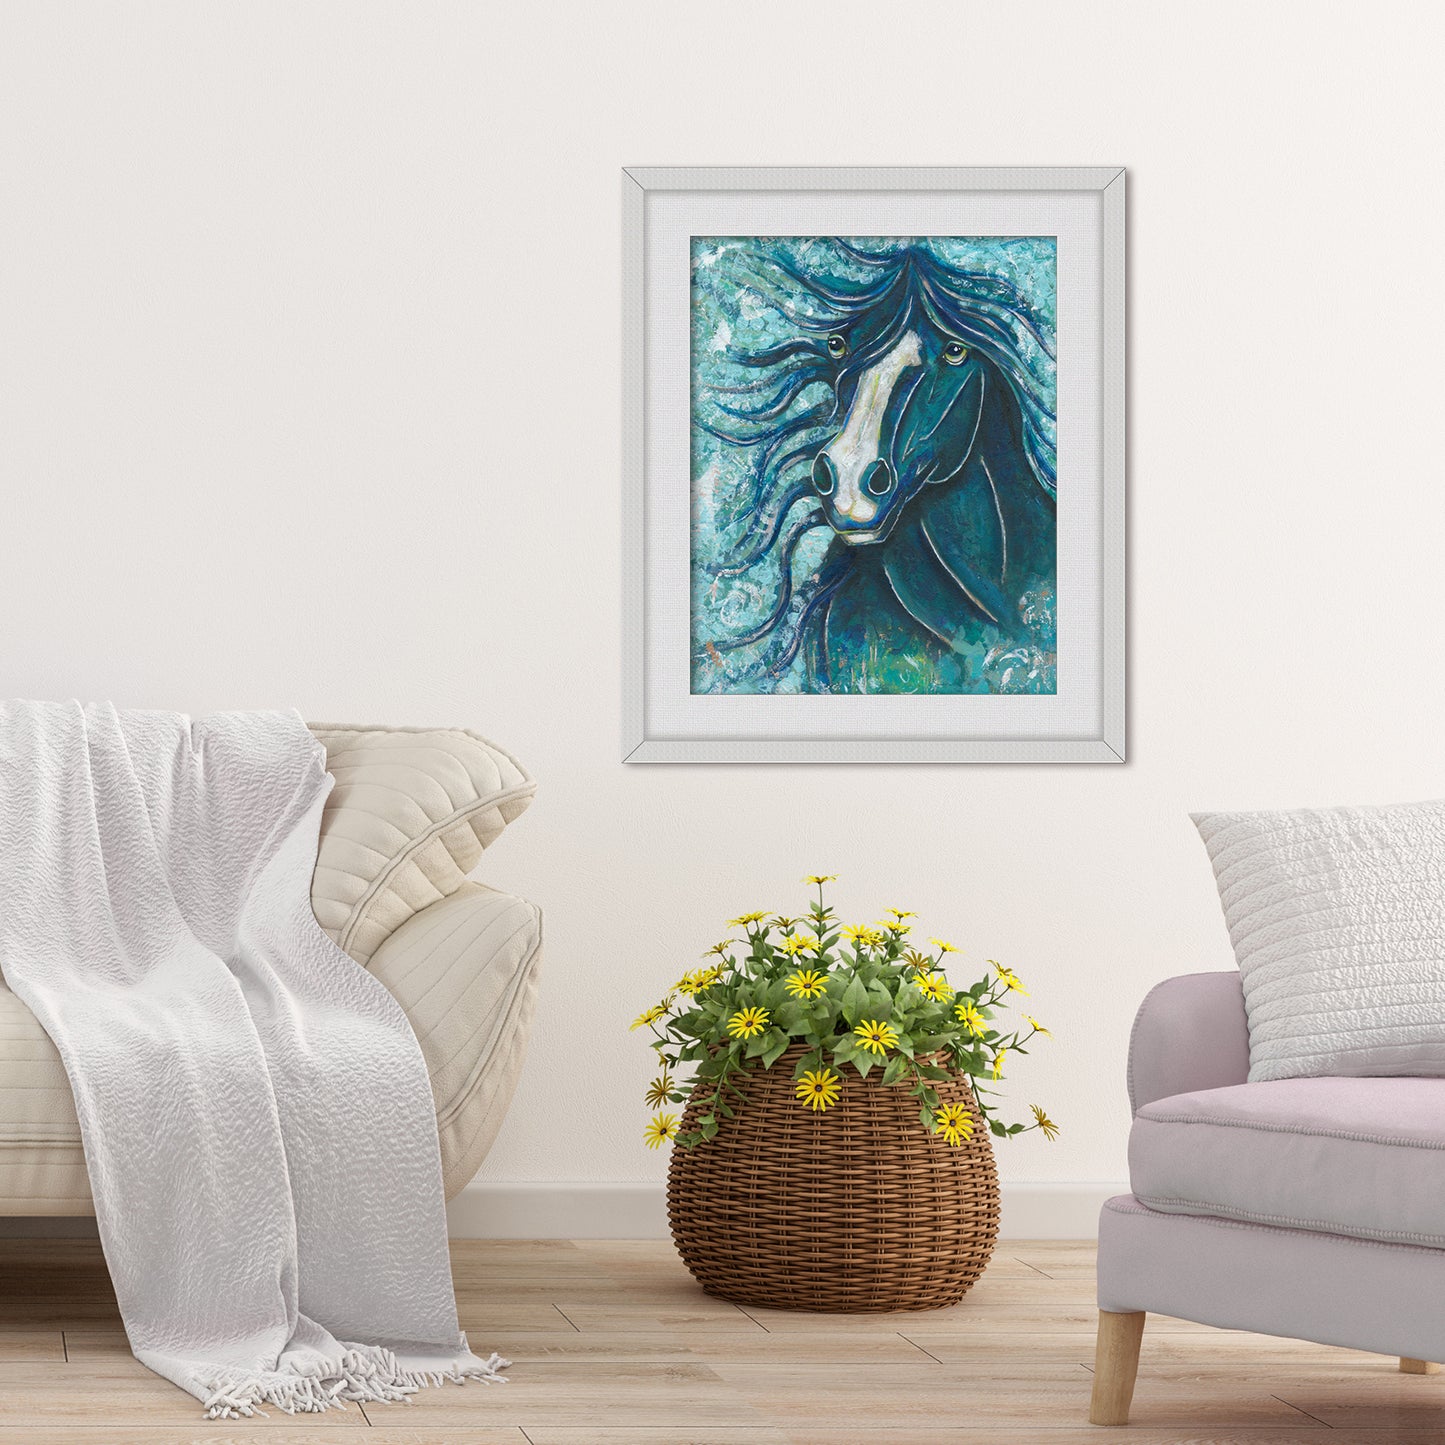 "Dark Turquoise and Teal" Horse Fine Art Print